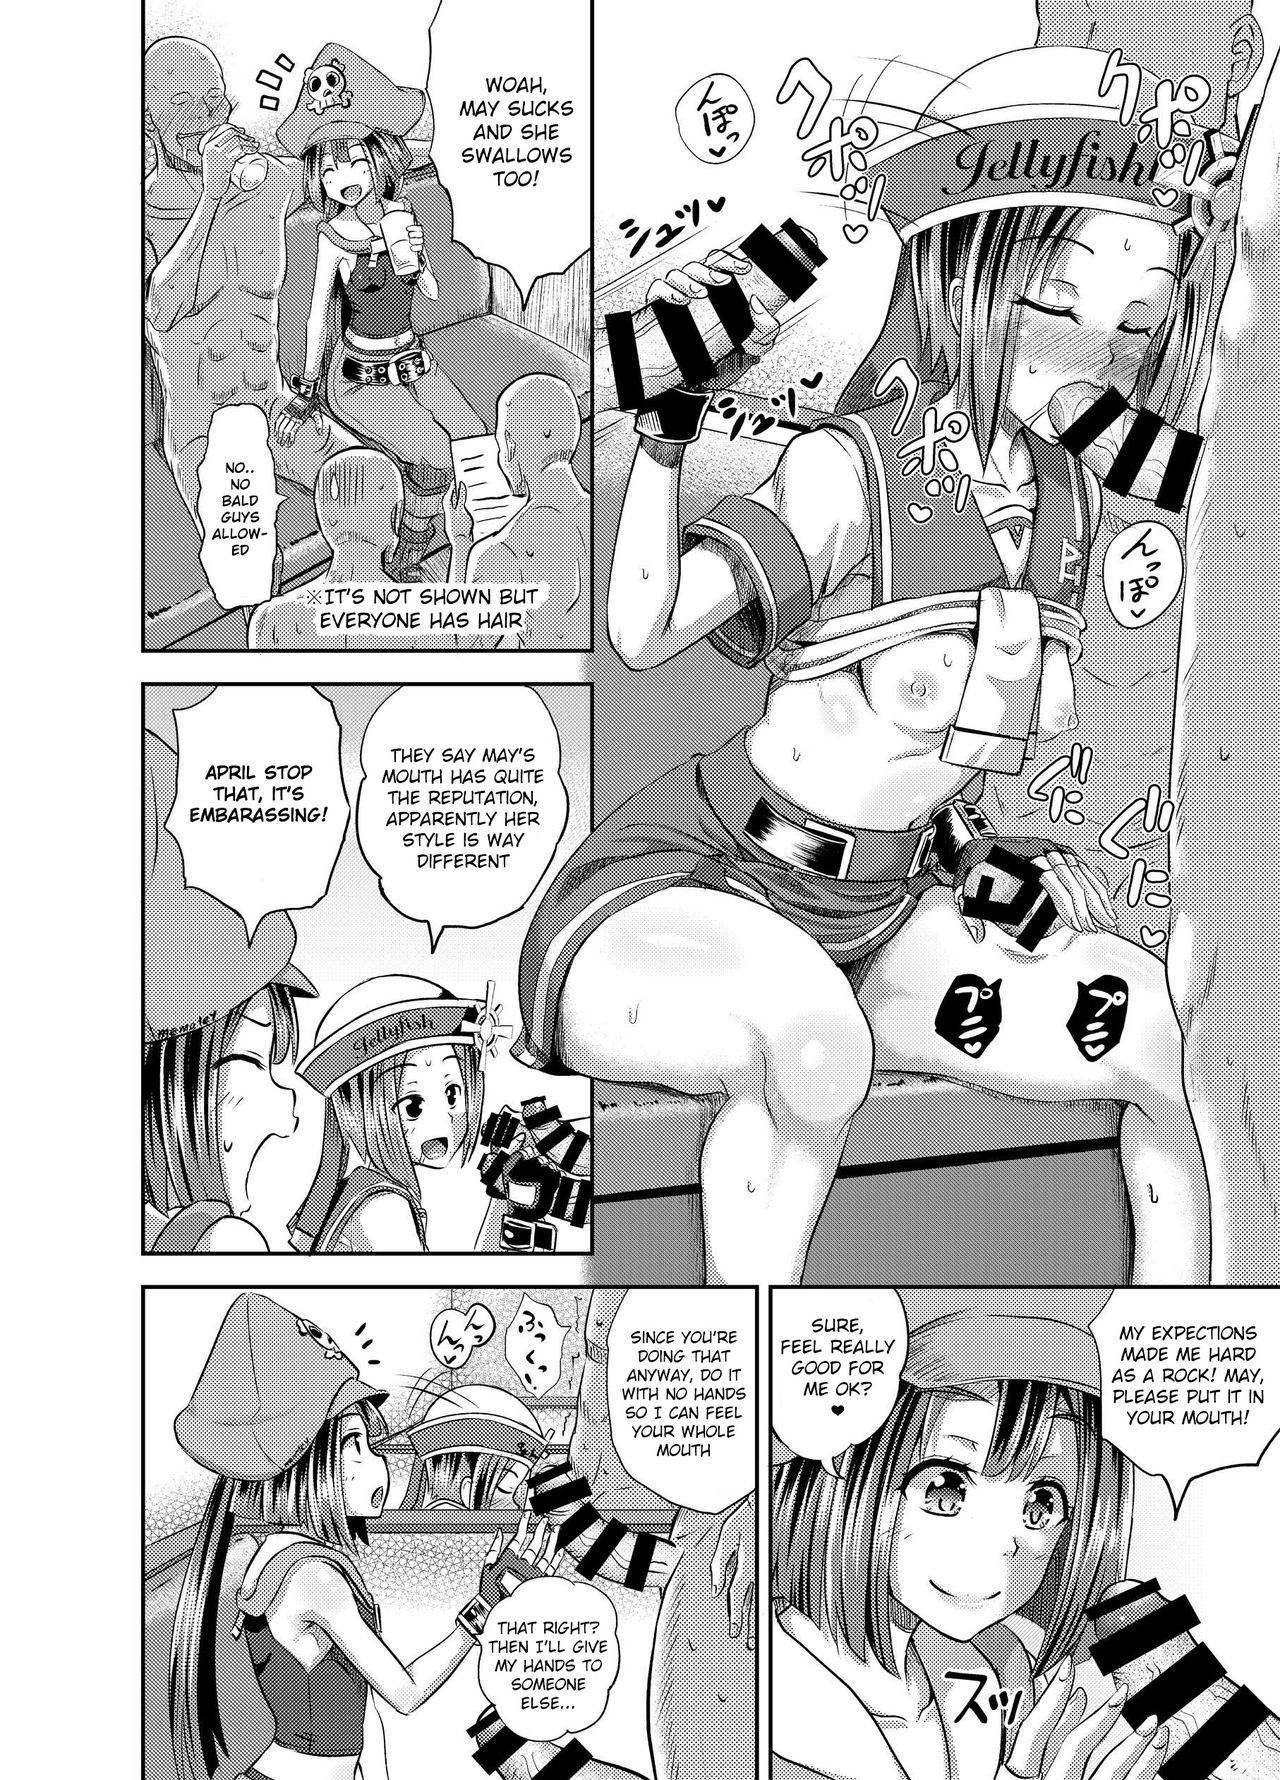 Solo Girl Jellyfish Kaizokudan e Youkoso! | Welcome to The Jellyfish Pleasure Club! - Guilty gear Pure18 - Page 5